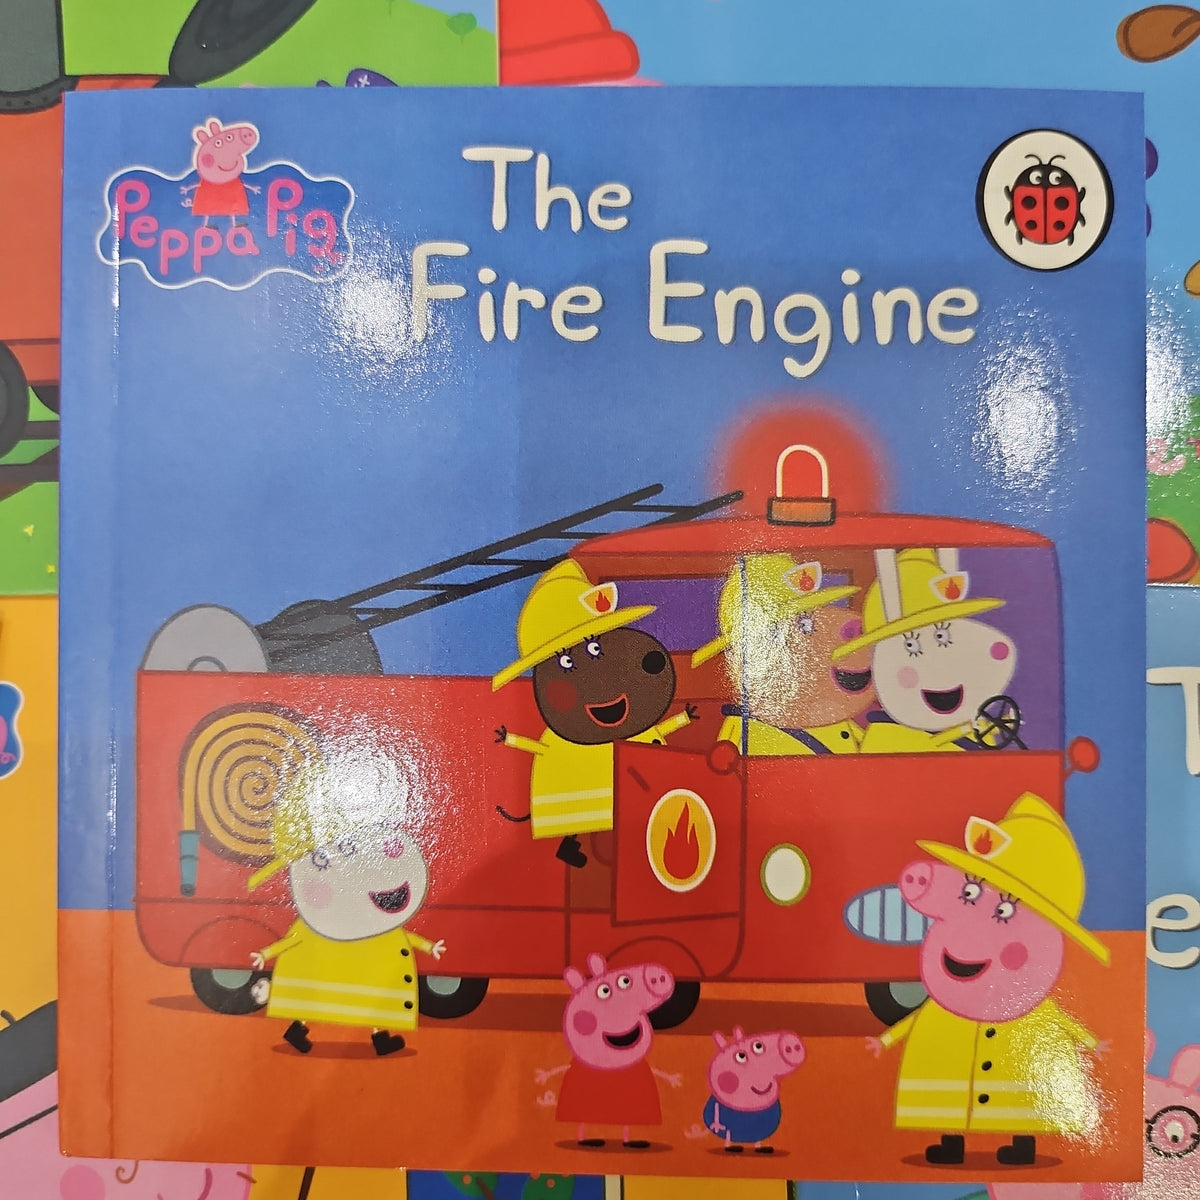 The Incredible Peppa Pig Collection:The Fire Engine